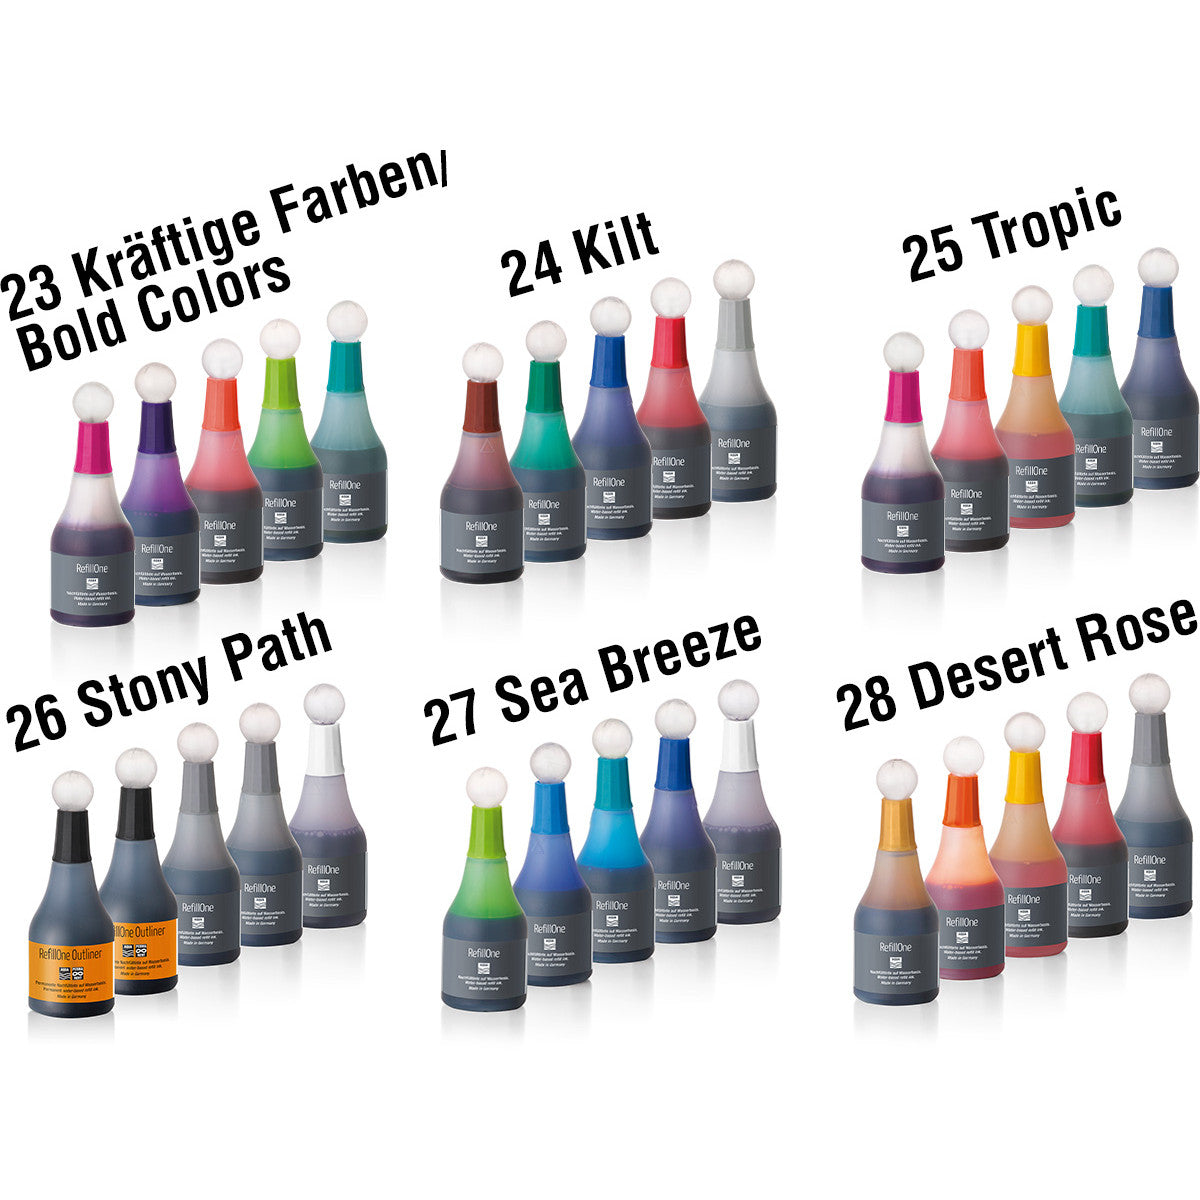 Refill ink RefillOne color sets